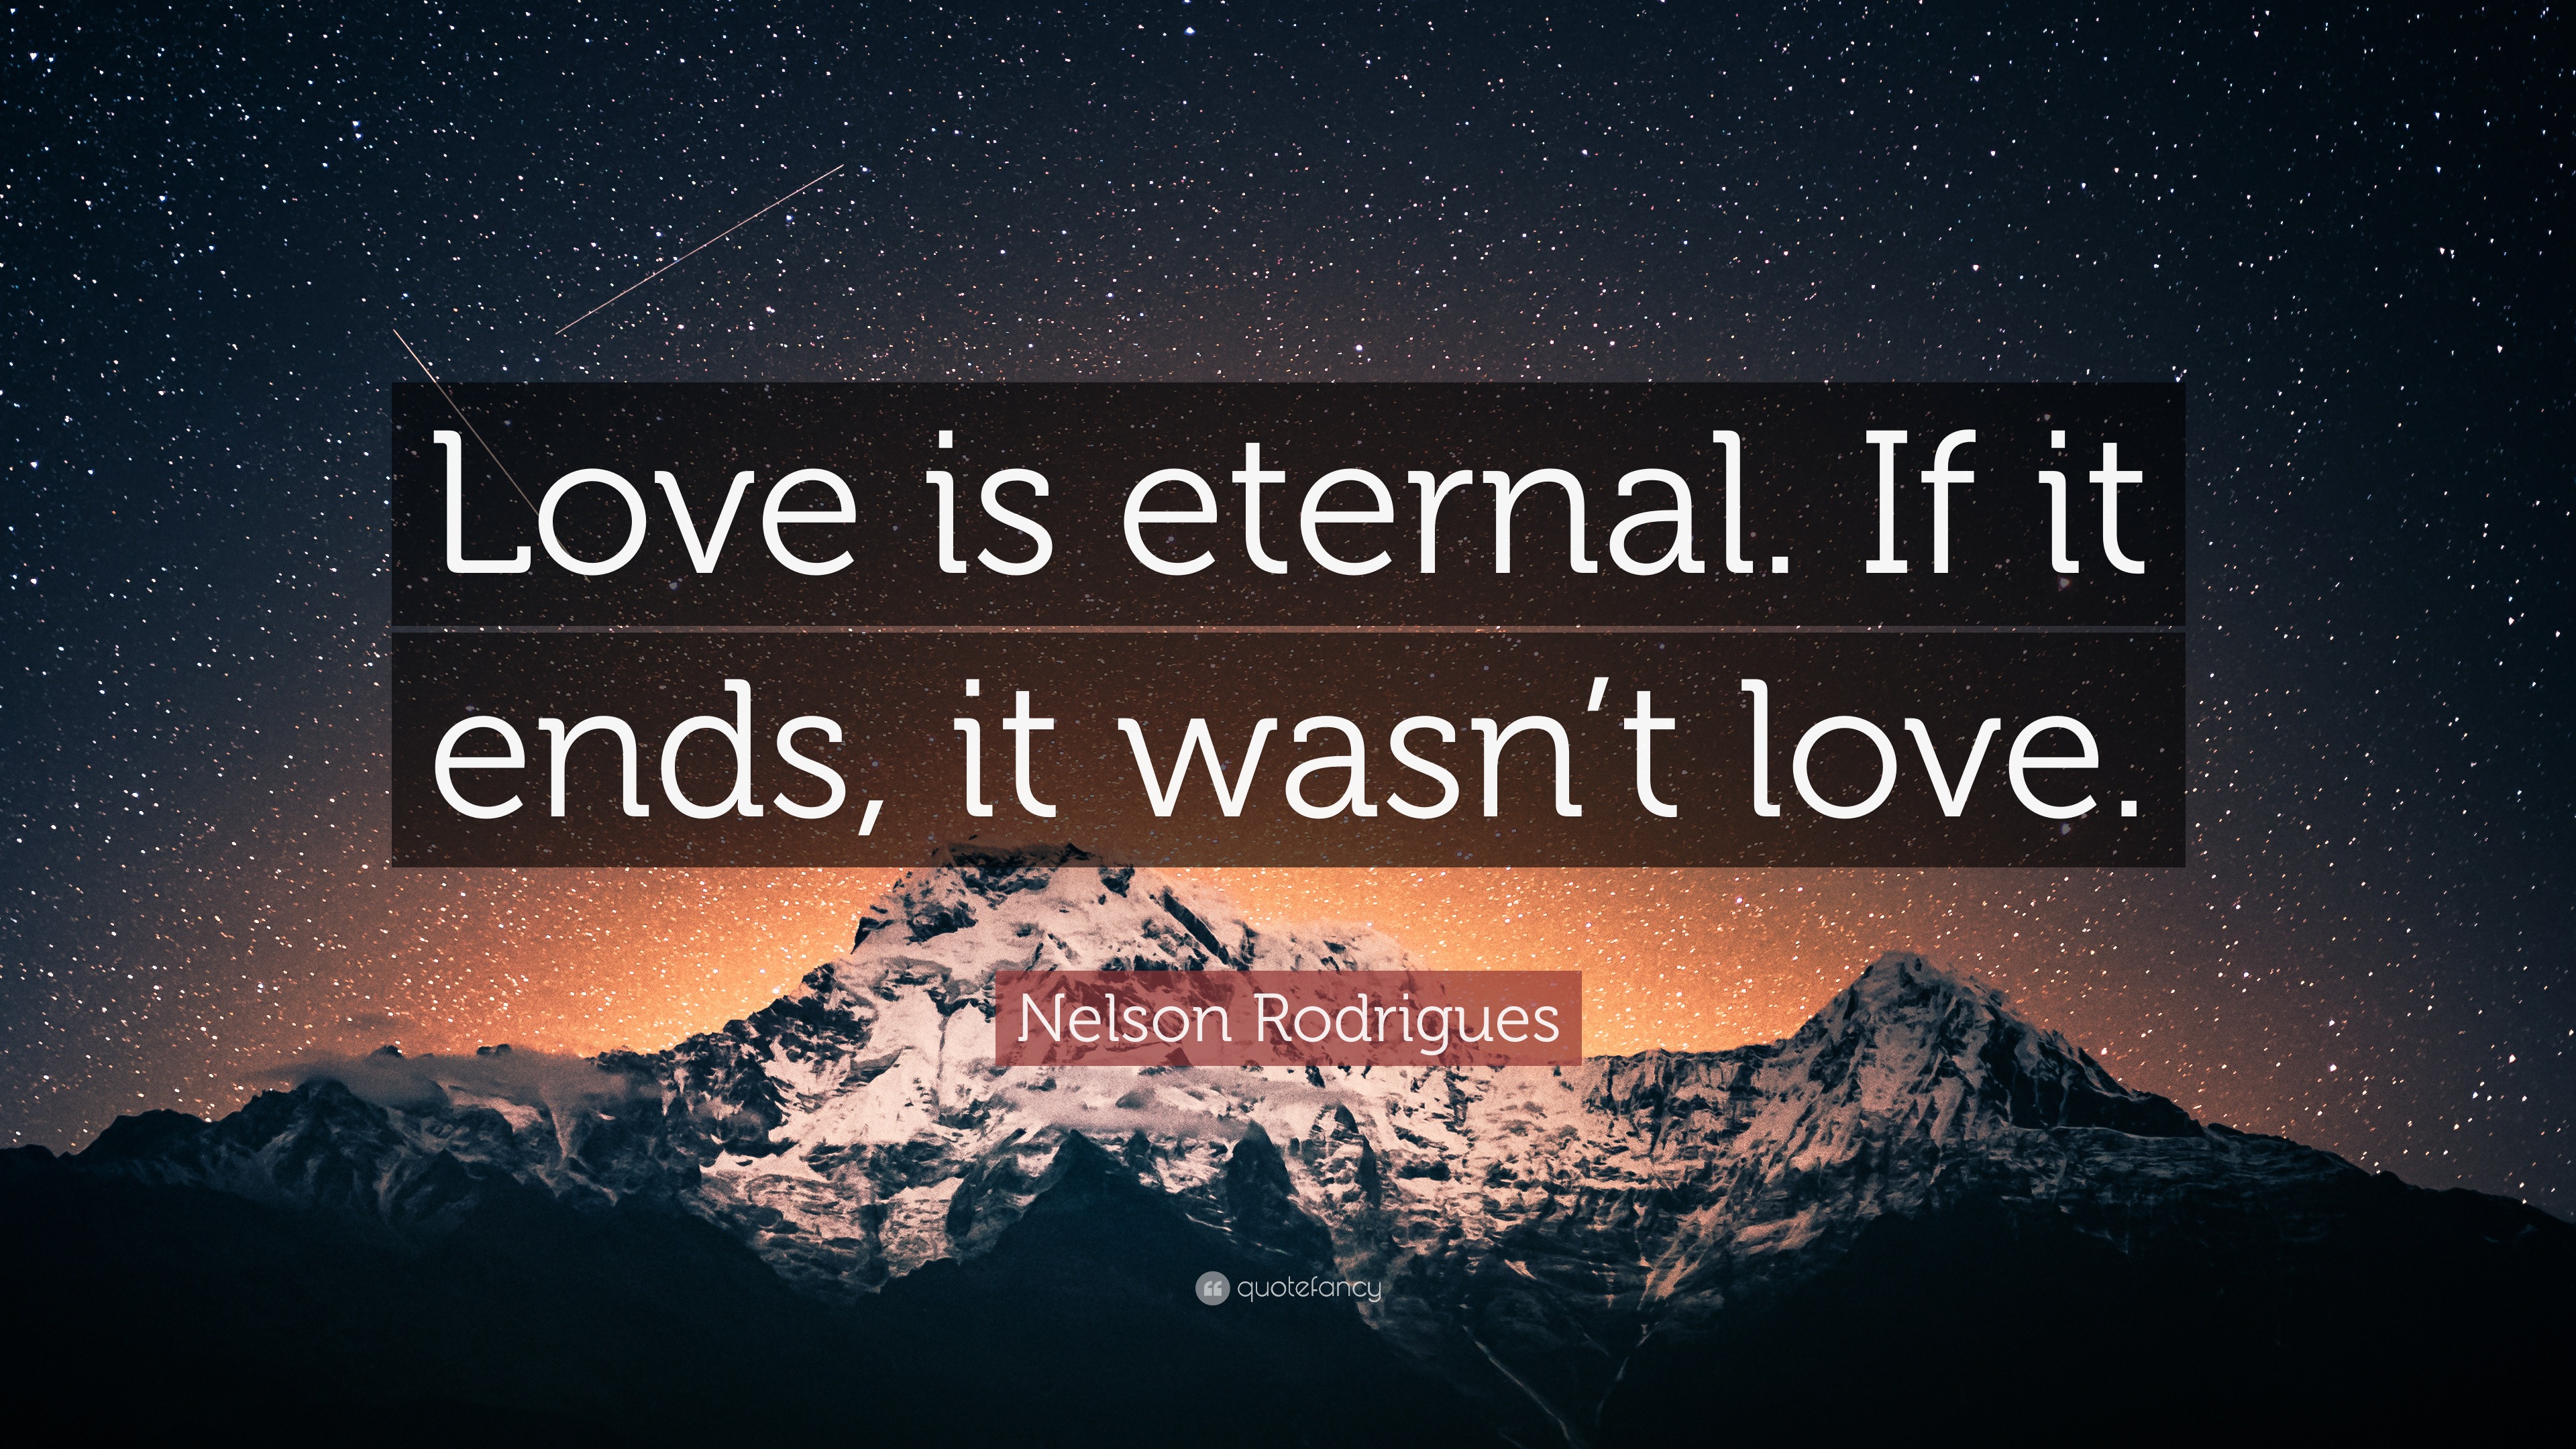 4129964 Nelson Rodrigues Quote Love Is Eternal If It Ends It Wasn T Love 